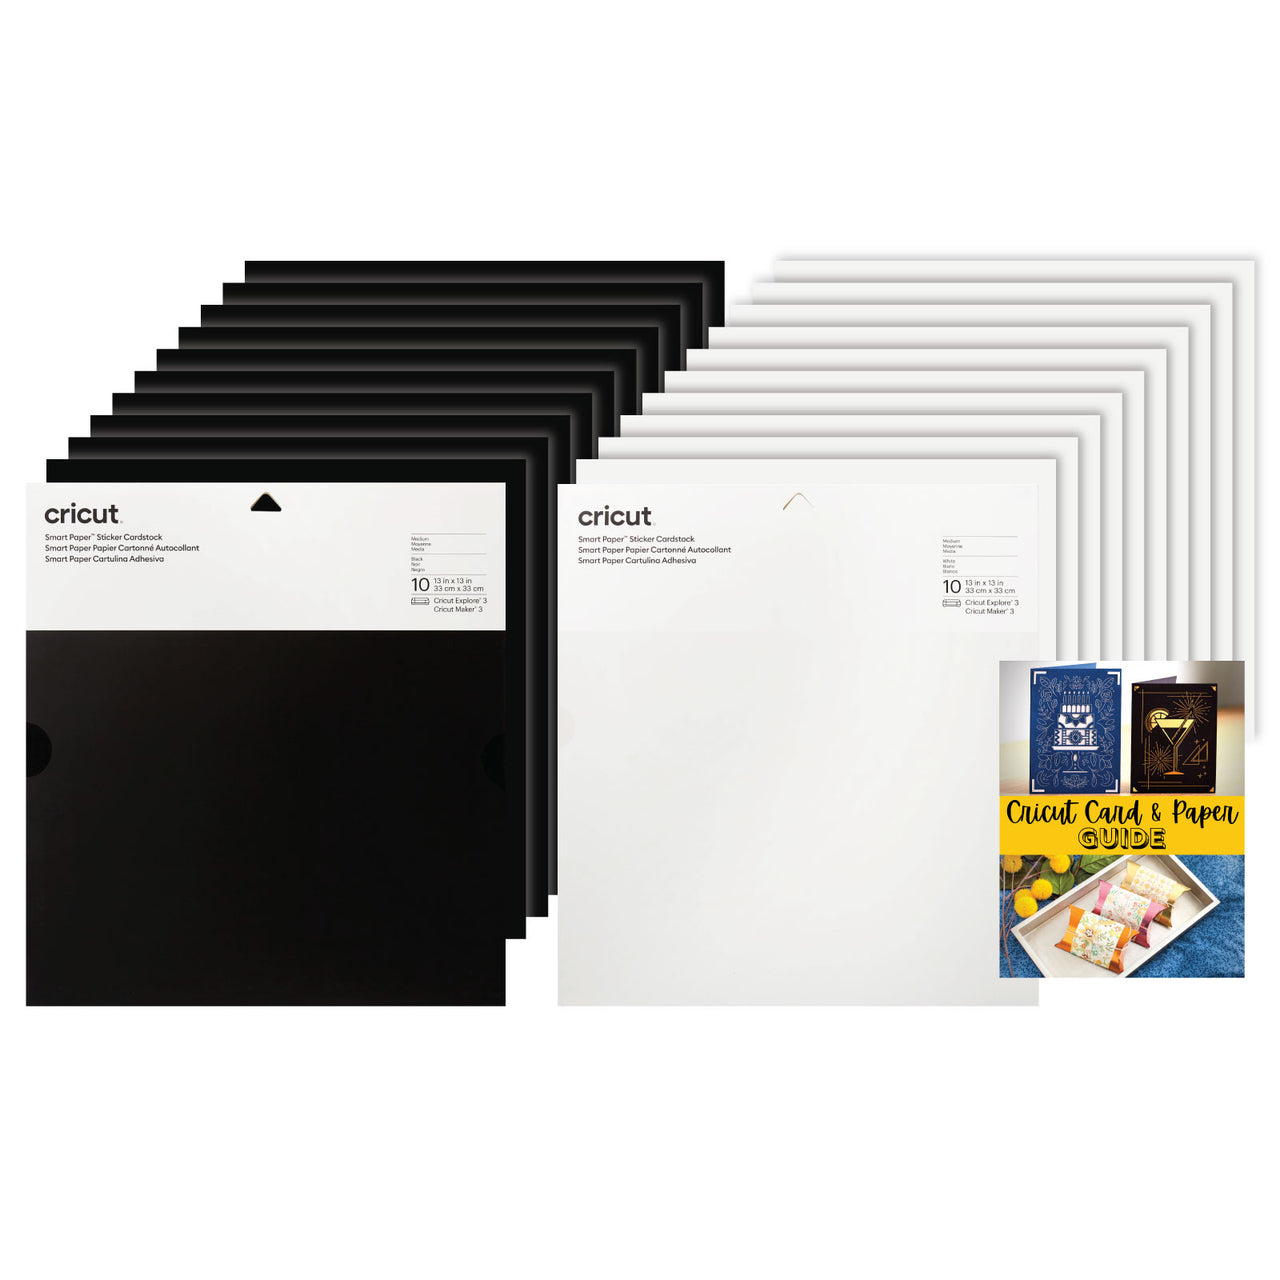 Cricut Smart Paper Sticker Cardstock Black and White Bundle 10 Sheets - 13in x 13in - Adhesive Paper for Stickers